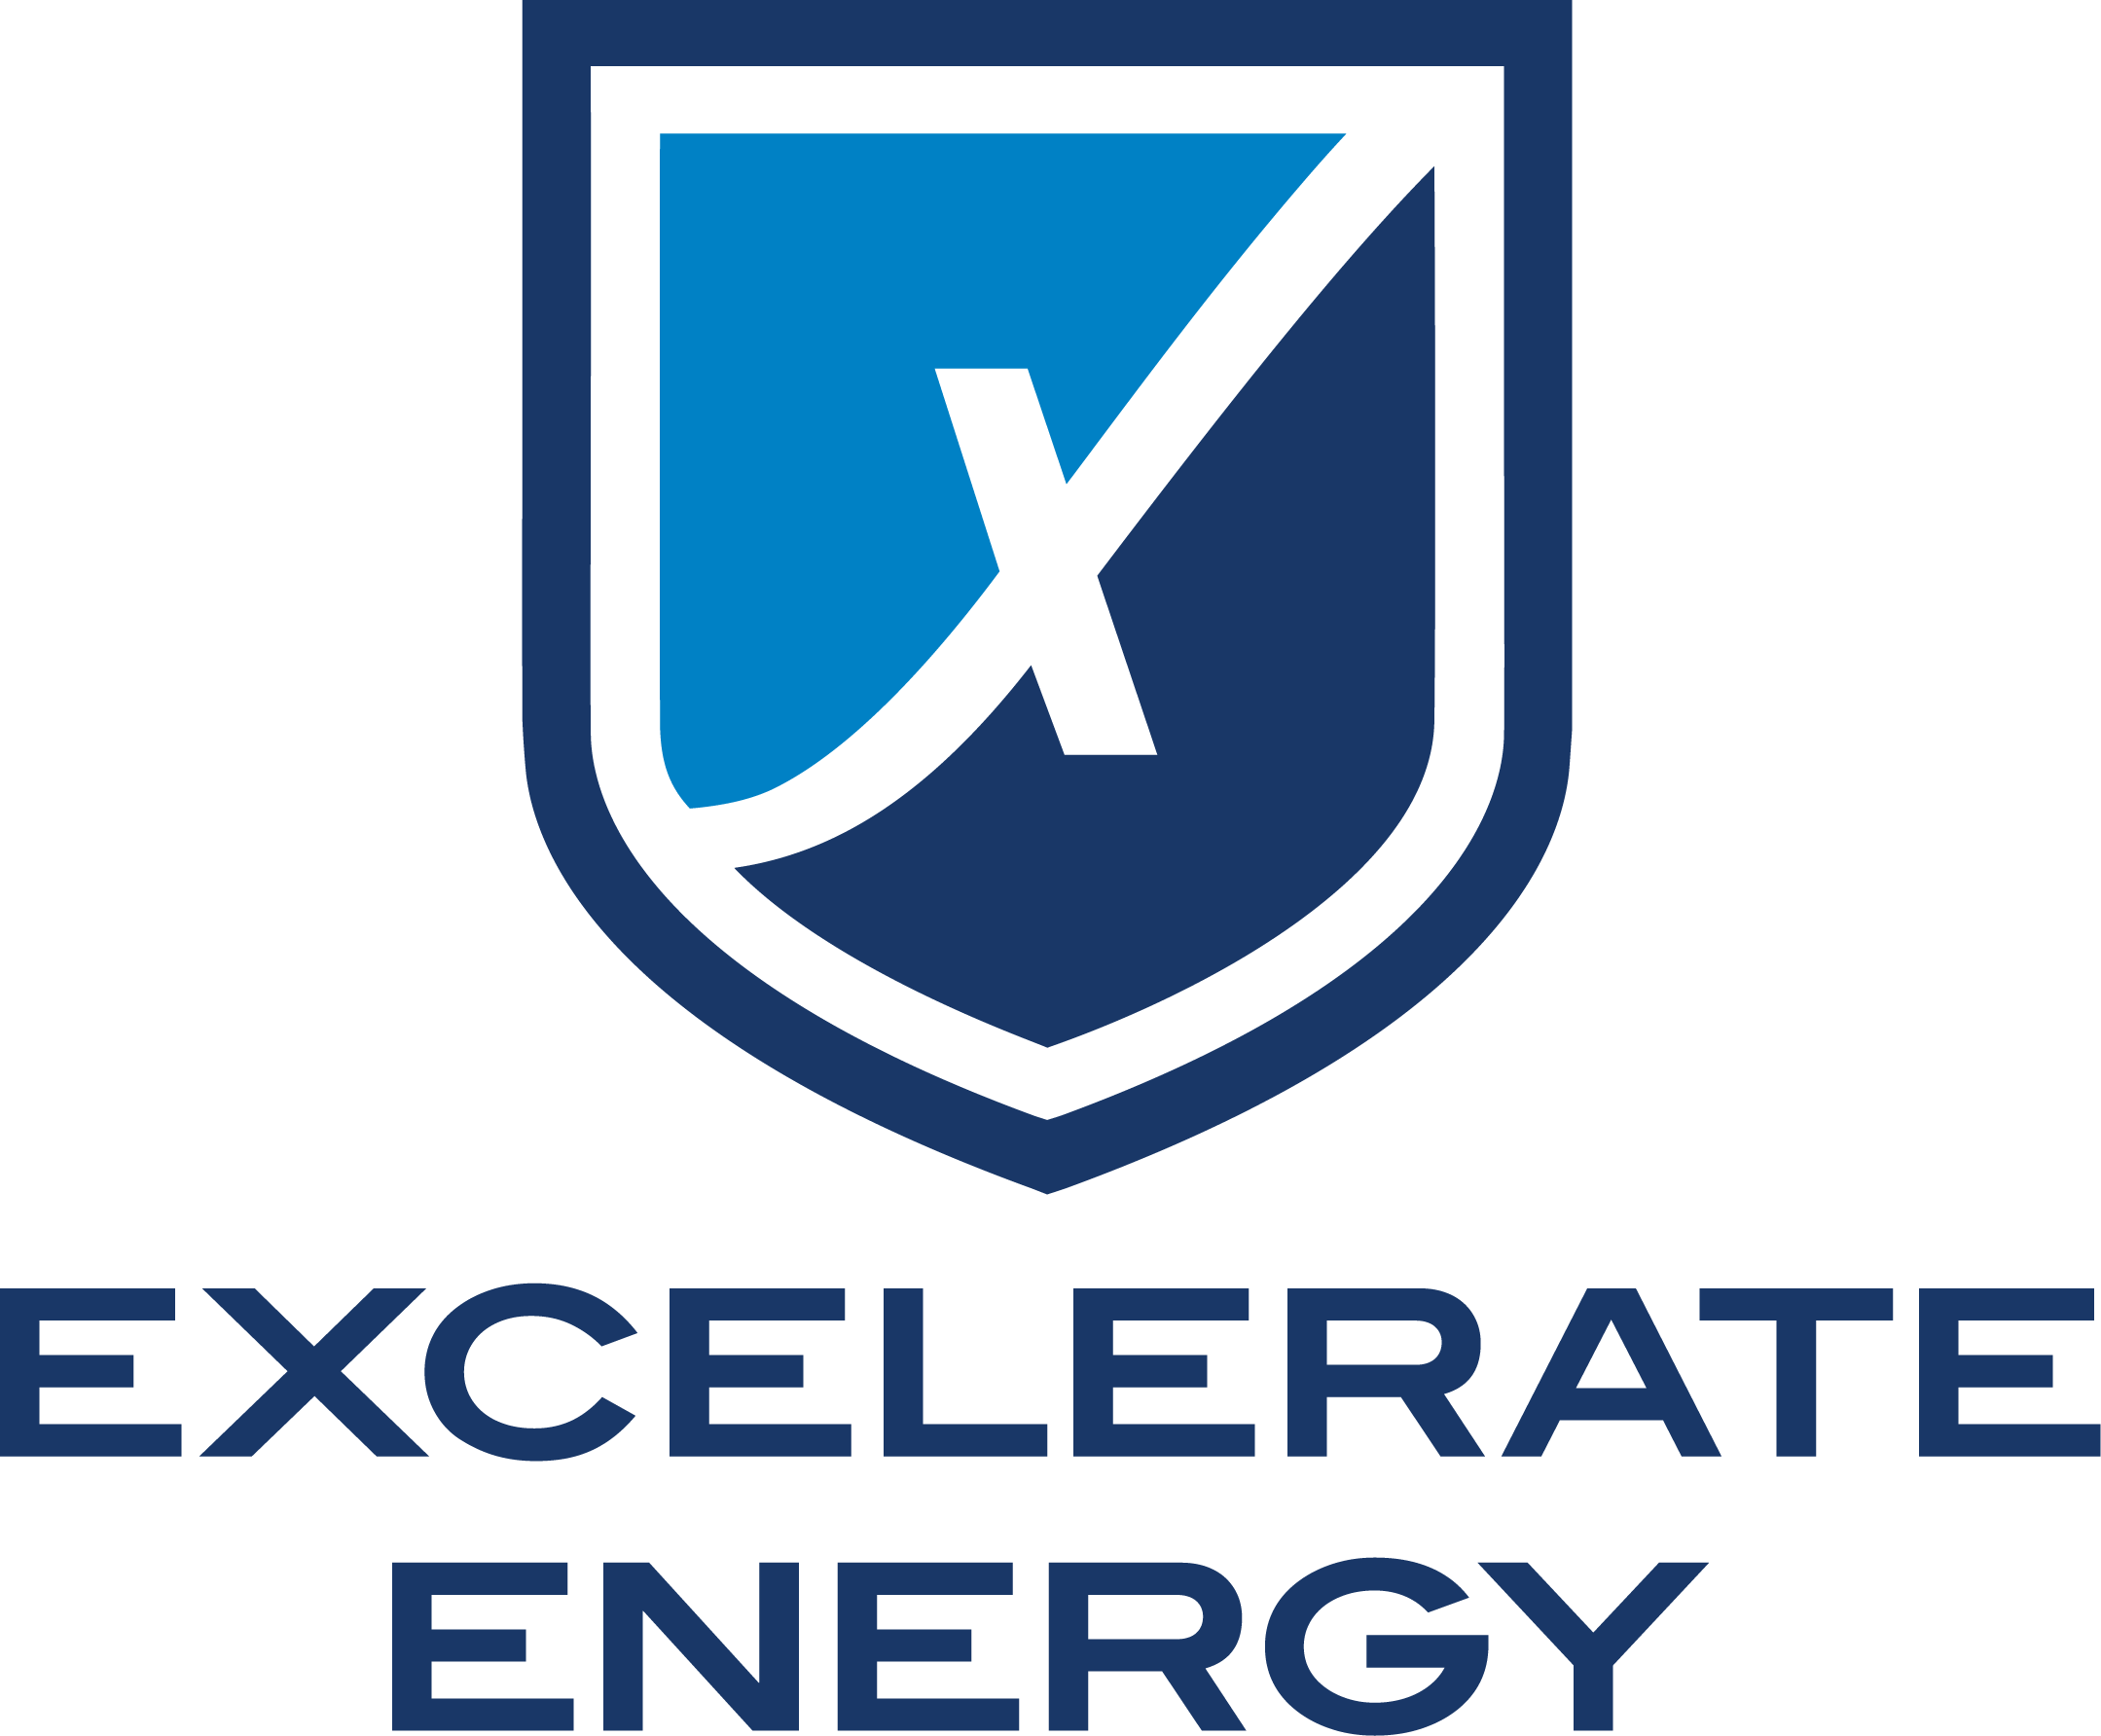 Excelerate Energy Stock Price. Everything You Need To Know About The Excelerate Energy Stock!